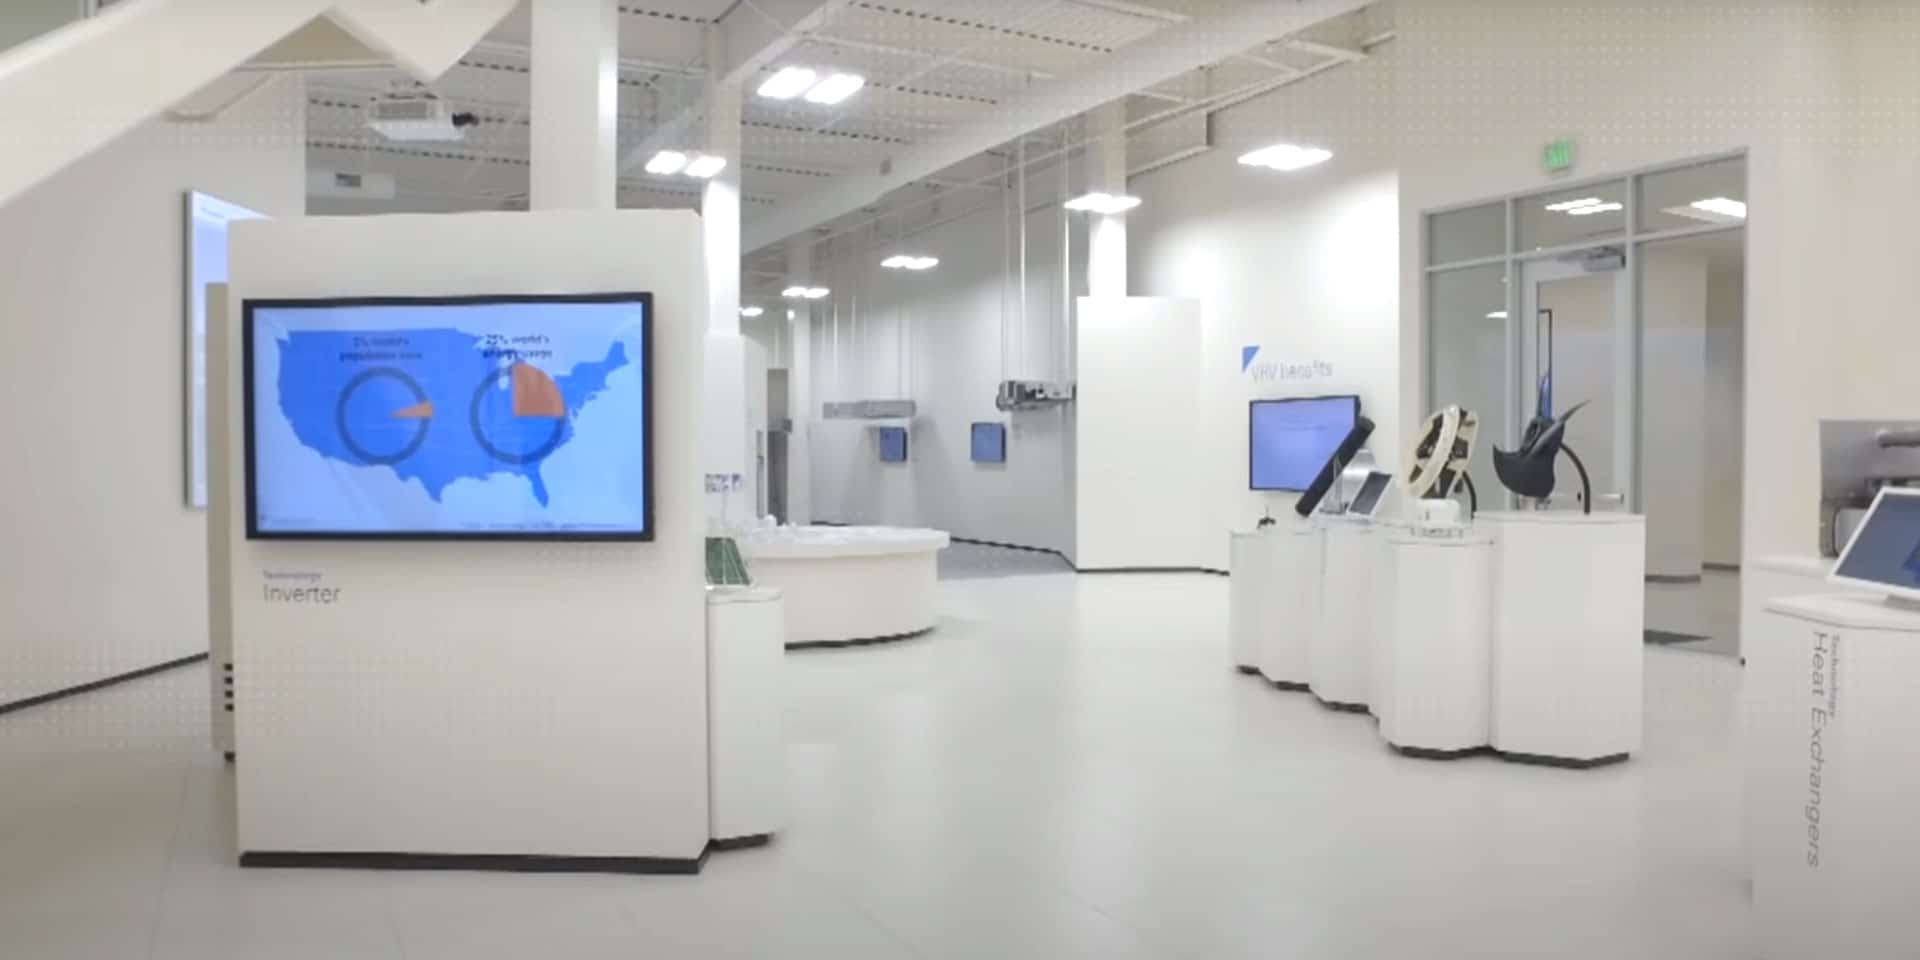 Customer experience showroom with several video displays